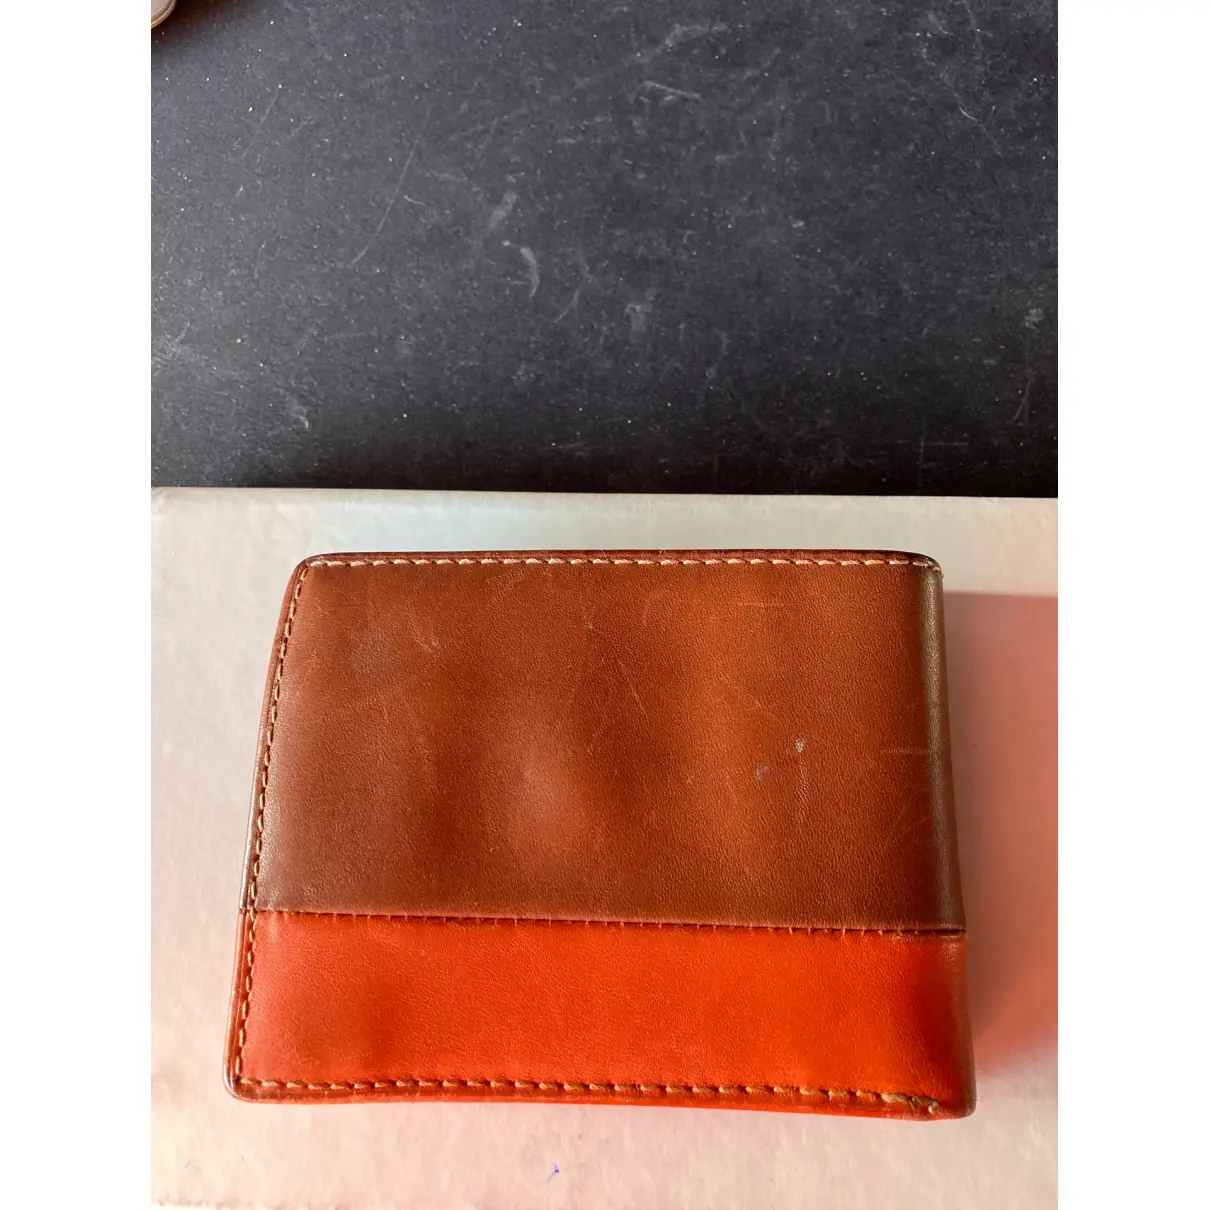 Buy Fossil Leather wallet online